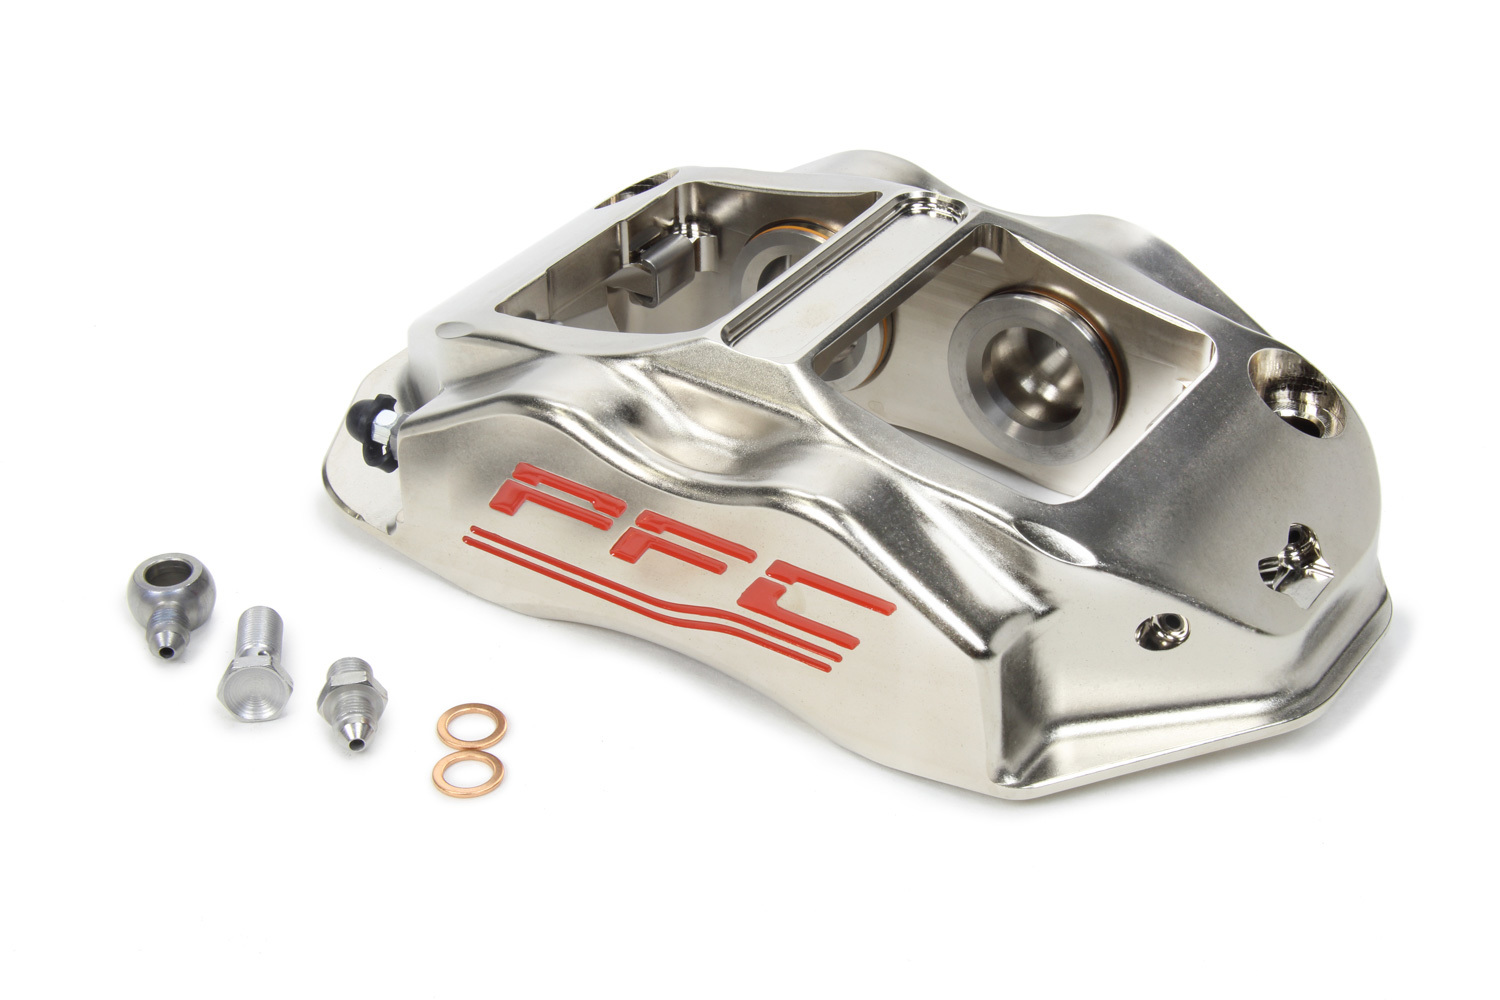 Performance Friction 94.323.290.365.02 Brake Caliper, ZR94, Passenger Side, Leading, 4 Piston, Aluminum, Nickel Plated, 12.716 in OD, 1.250 in Thick Rotor, 7.00 Radial Mount, Each